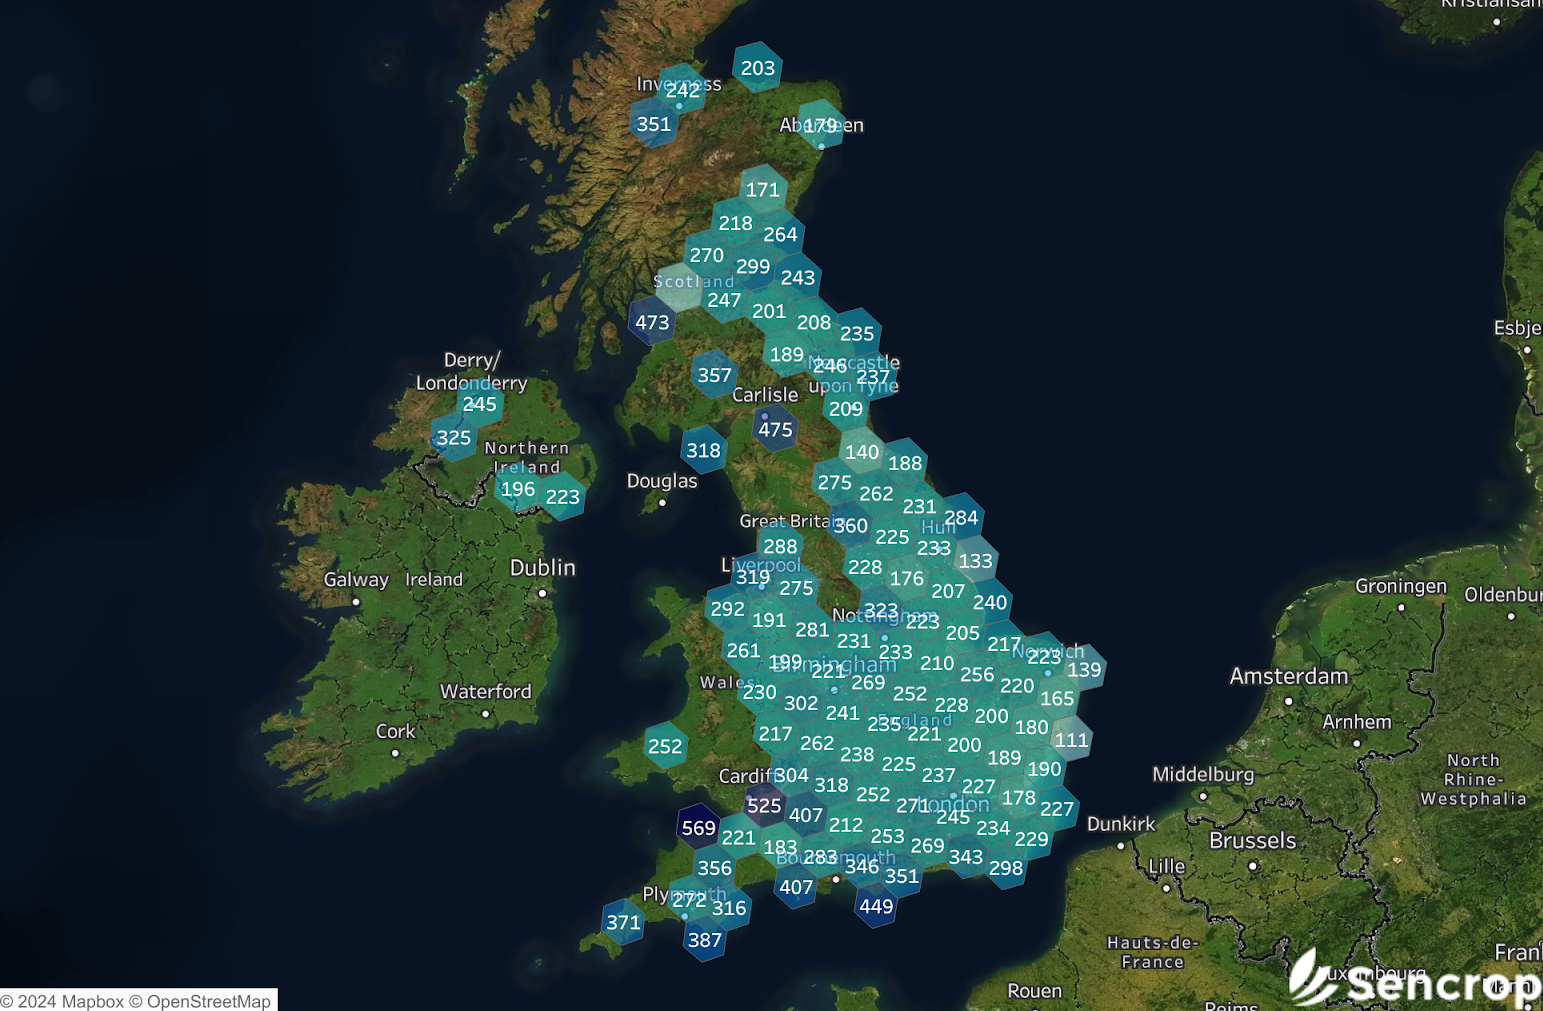 United Kingdom: an excessively warm winter, a record for February...